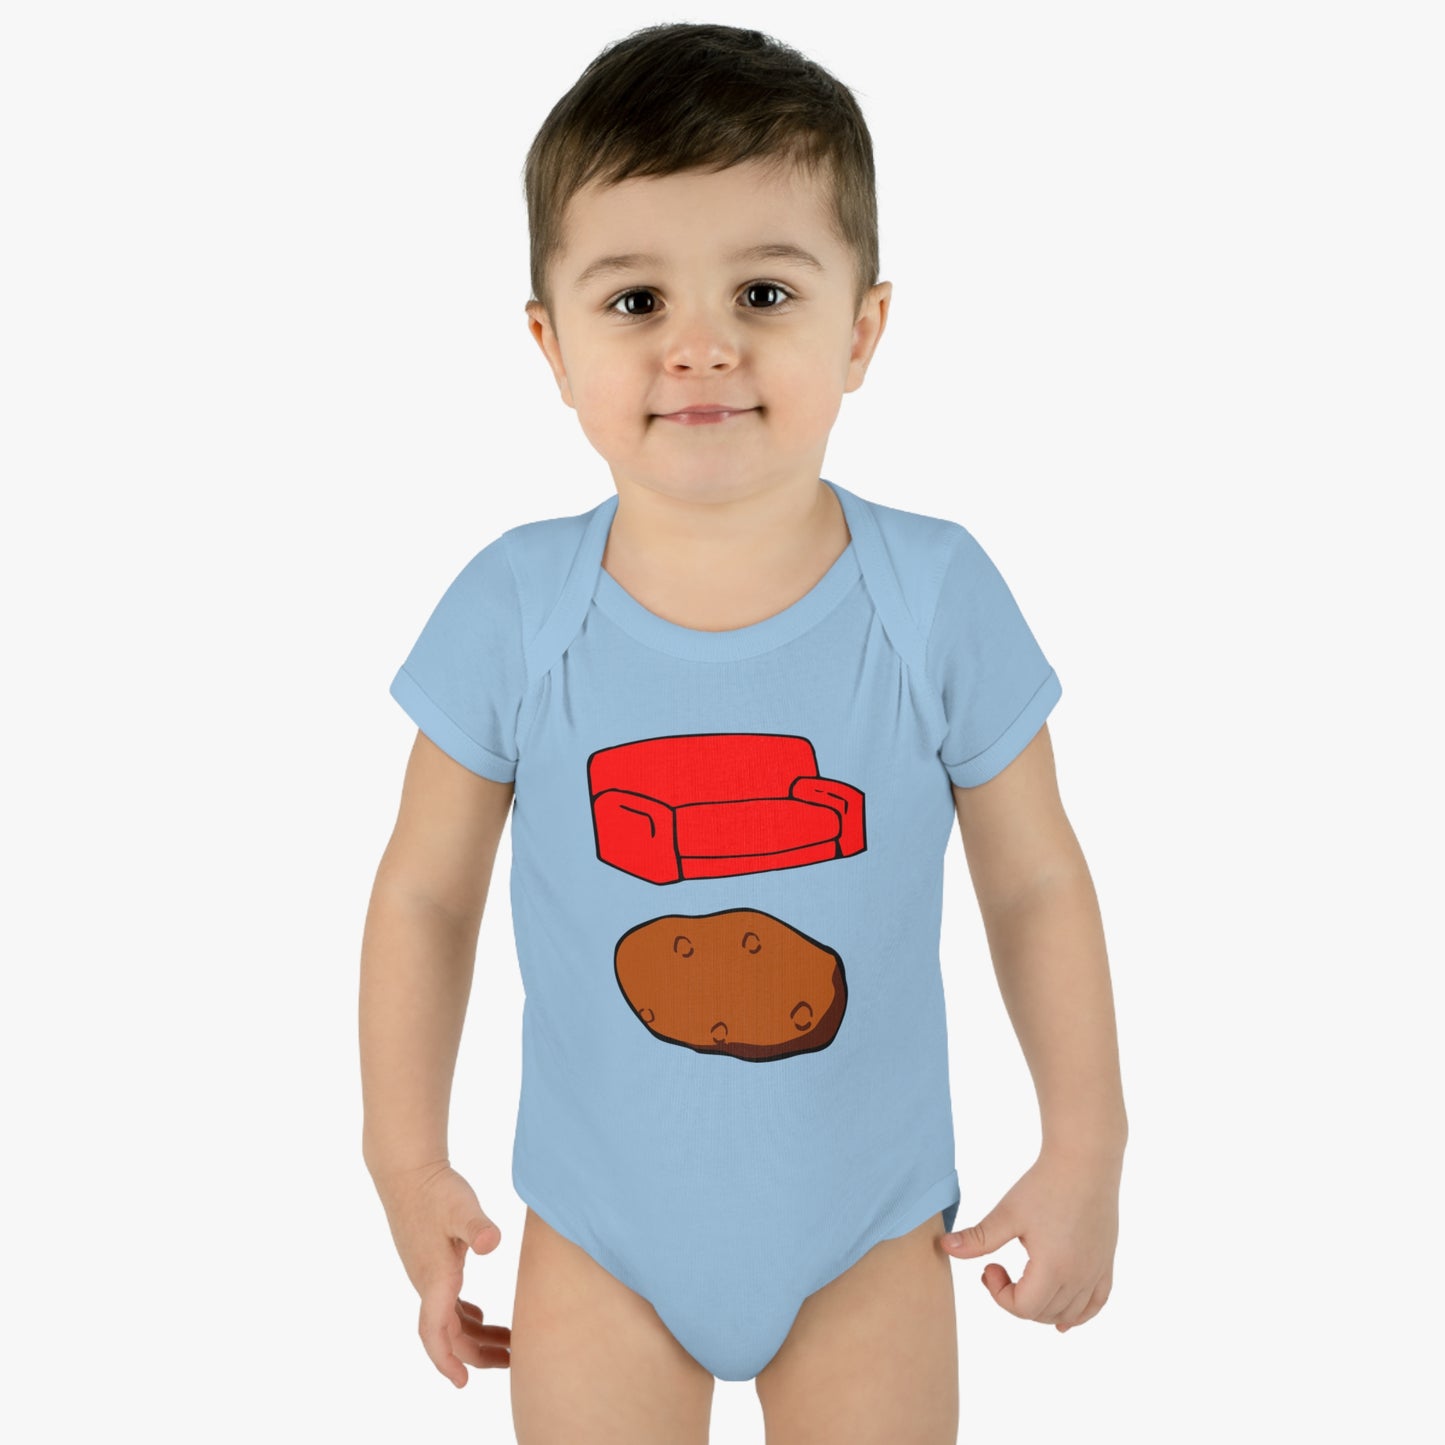 Couch Potato Bodysuit, Infant One Piece Football Fan, Graphic Tee showing Couch and a Potato, Baby Football Fan T-Shirt, Cute Baby Tee